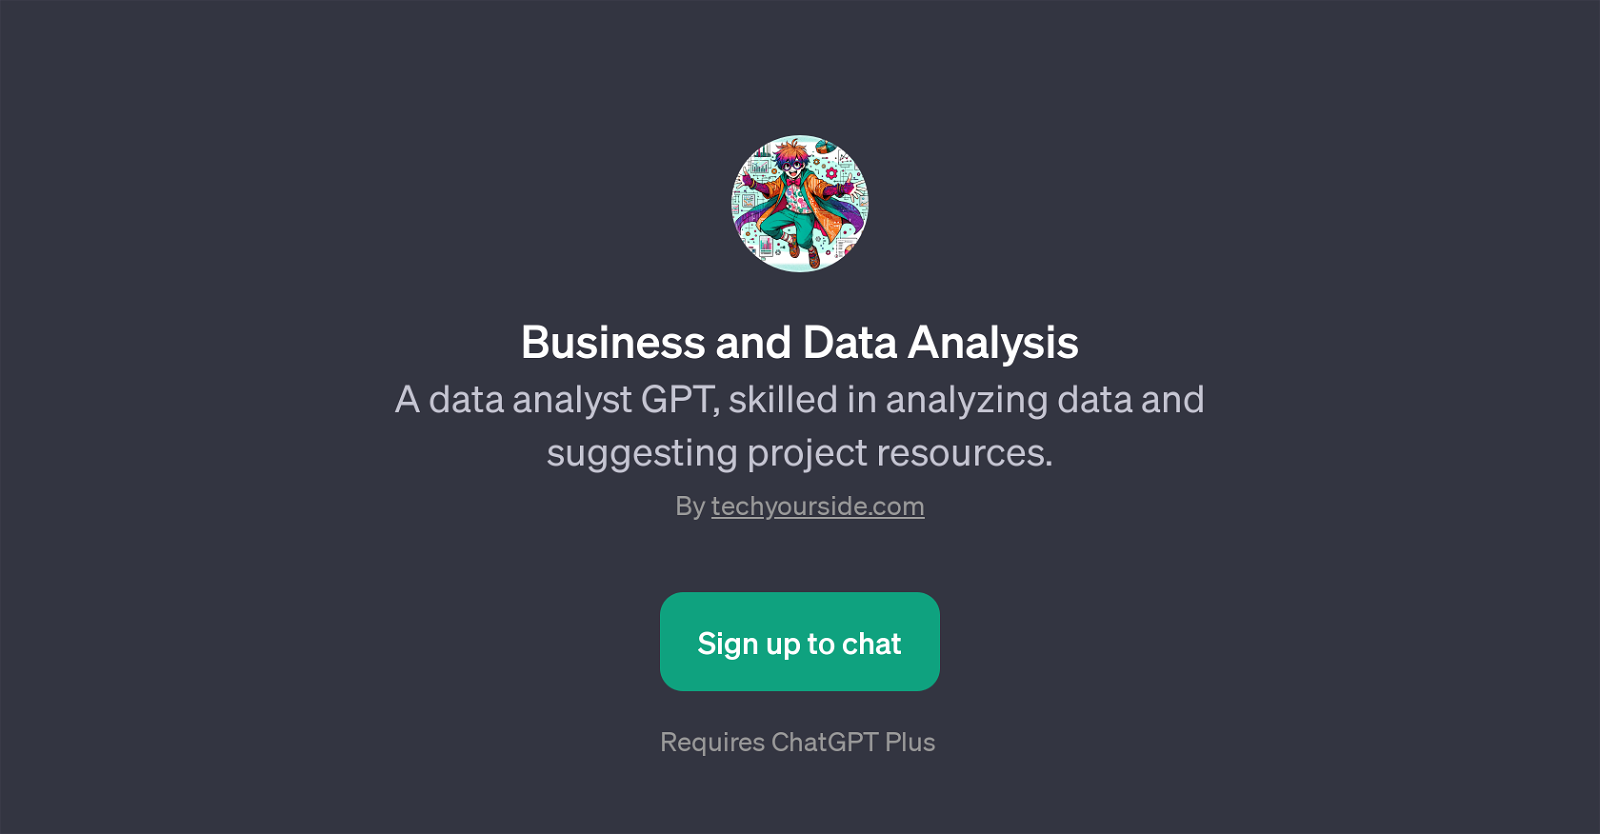 Business and Data Analysis GPT website